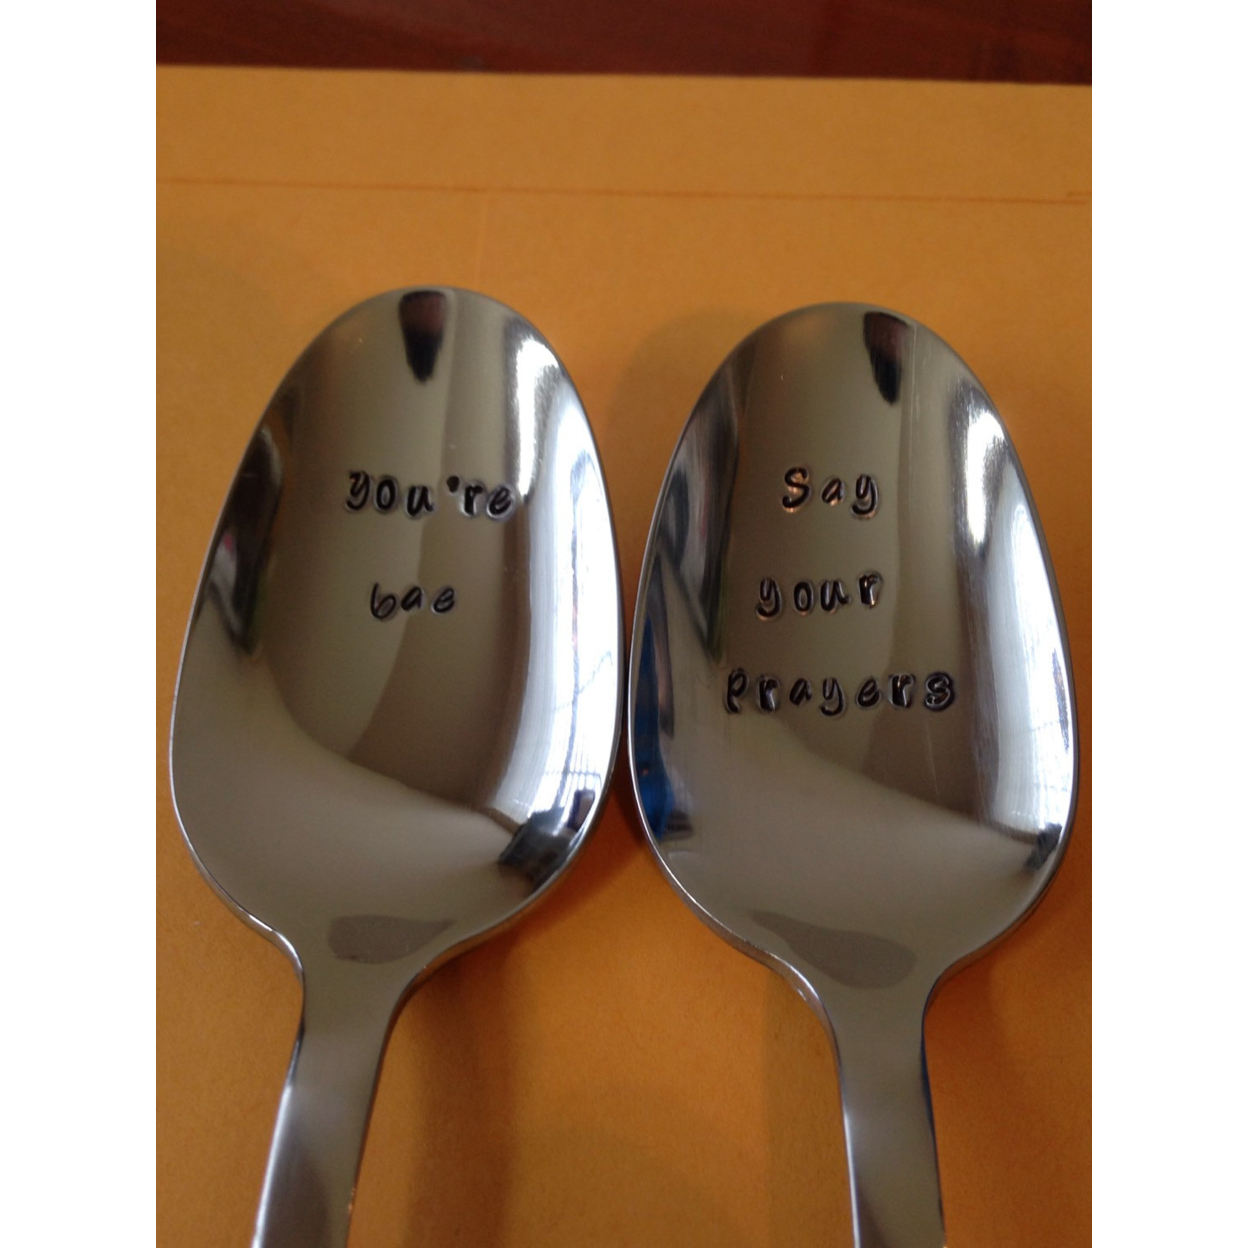 Ashi Jewelers Set of CUSTOM Ice Cream spoon-Hand Stamped Spoon -Personalized Spoon -Message of Choice -Gift for Best Friend, Gift for